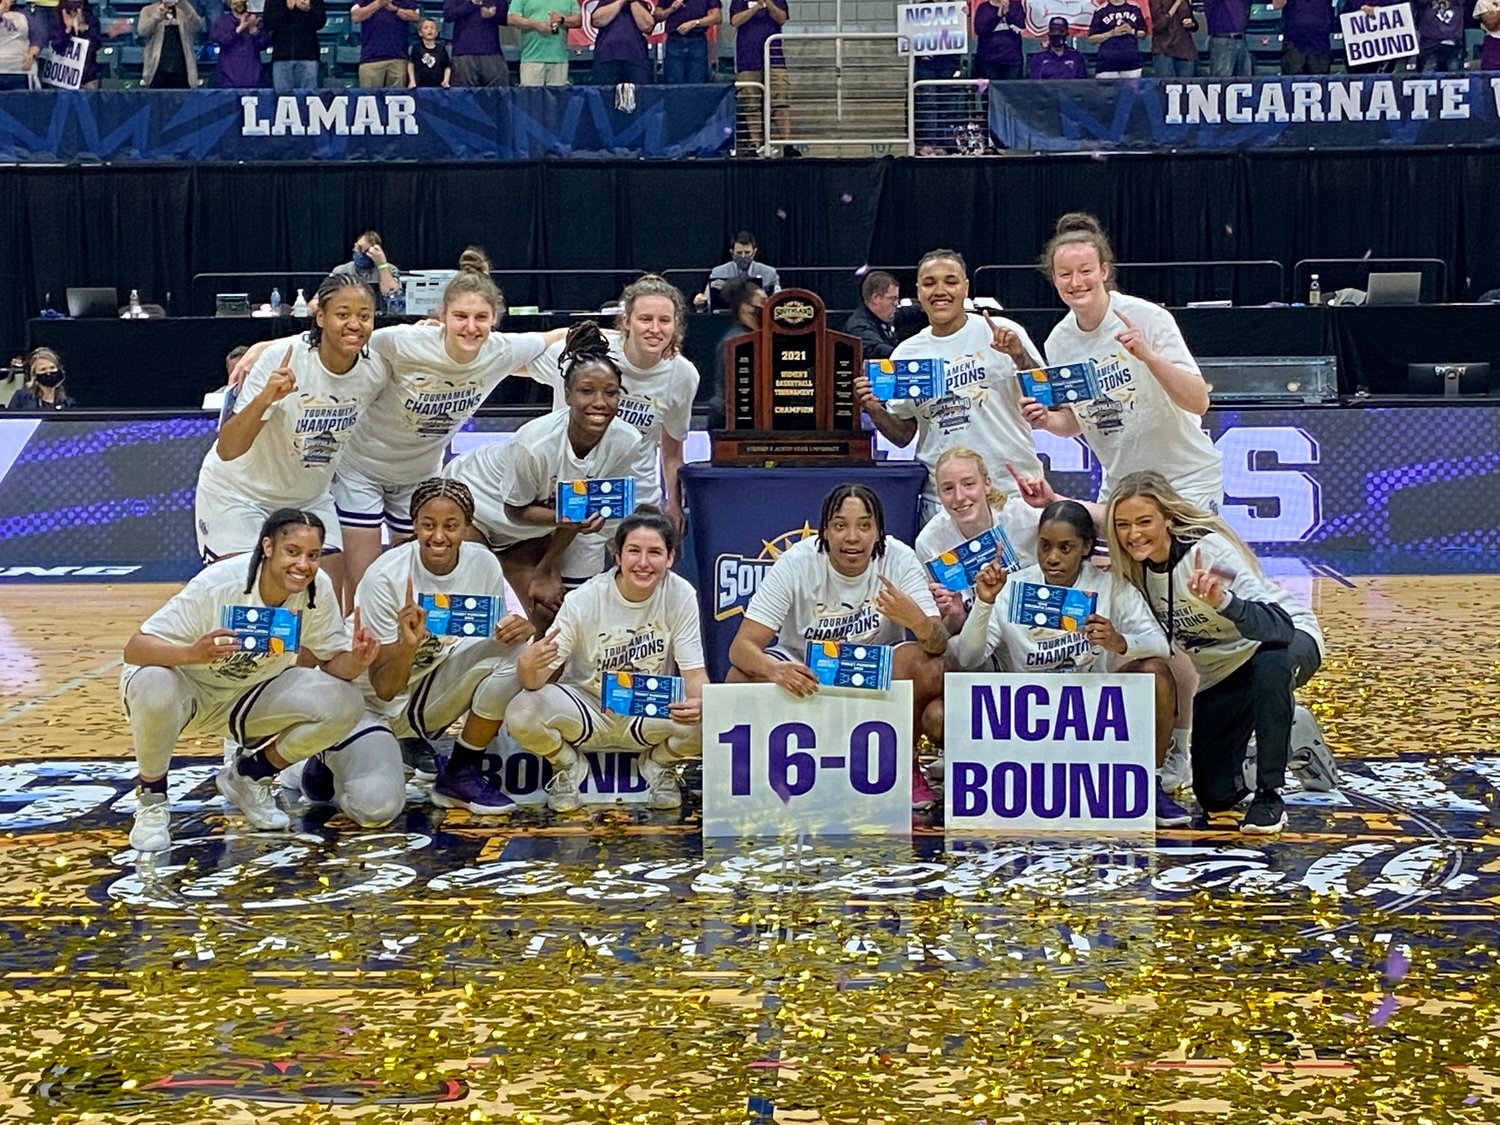 Stephen F. Austin players and coaches celebrate after the Ladyjacks beat Sam Houston State, 56-45, in the Southland Conference Tournament women's basketball championship game Sunday, March 14, at the Merrell Center.